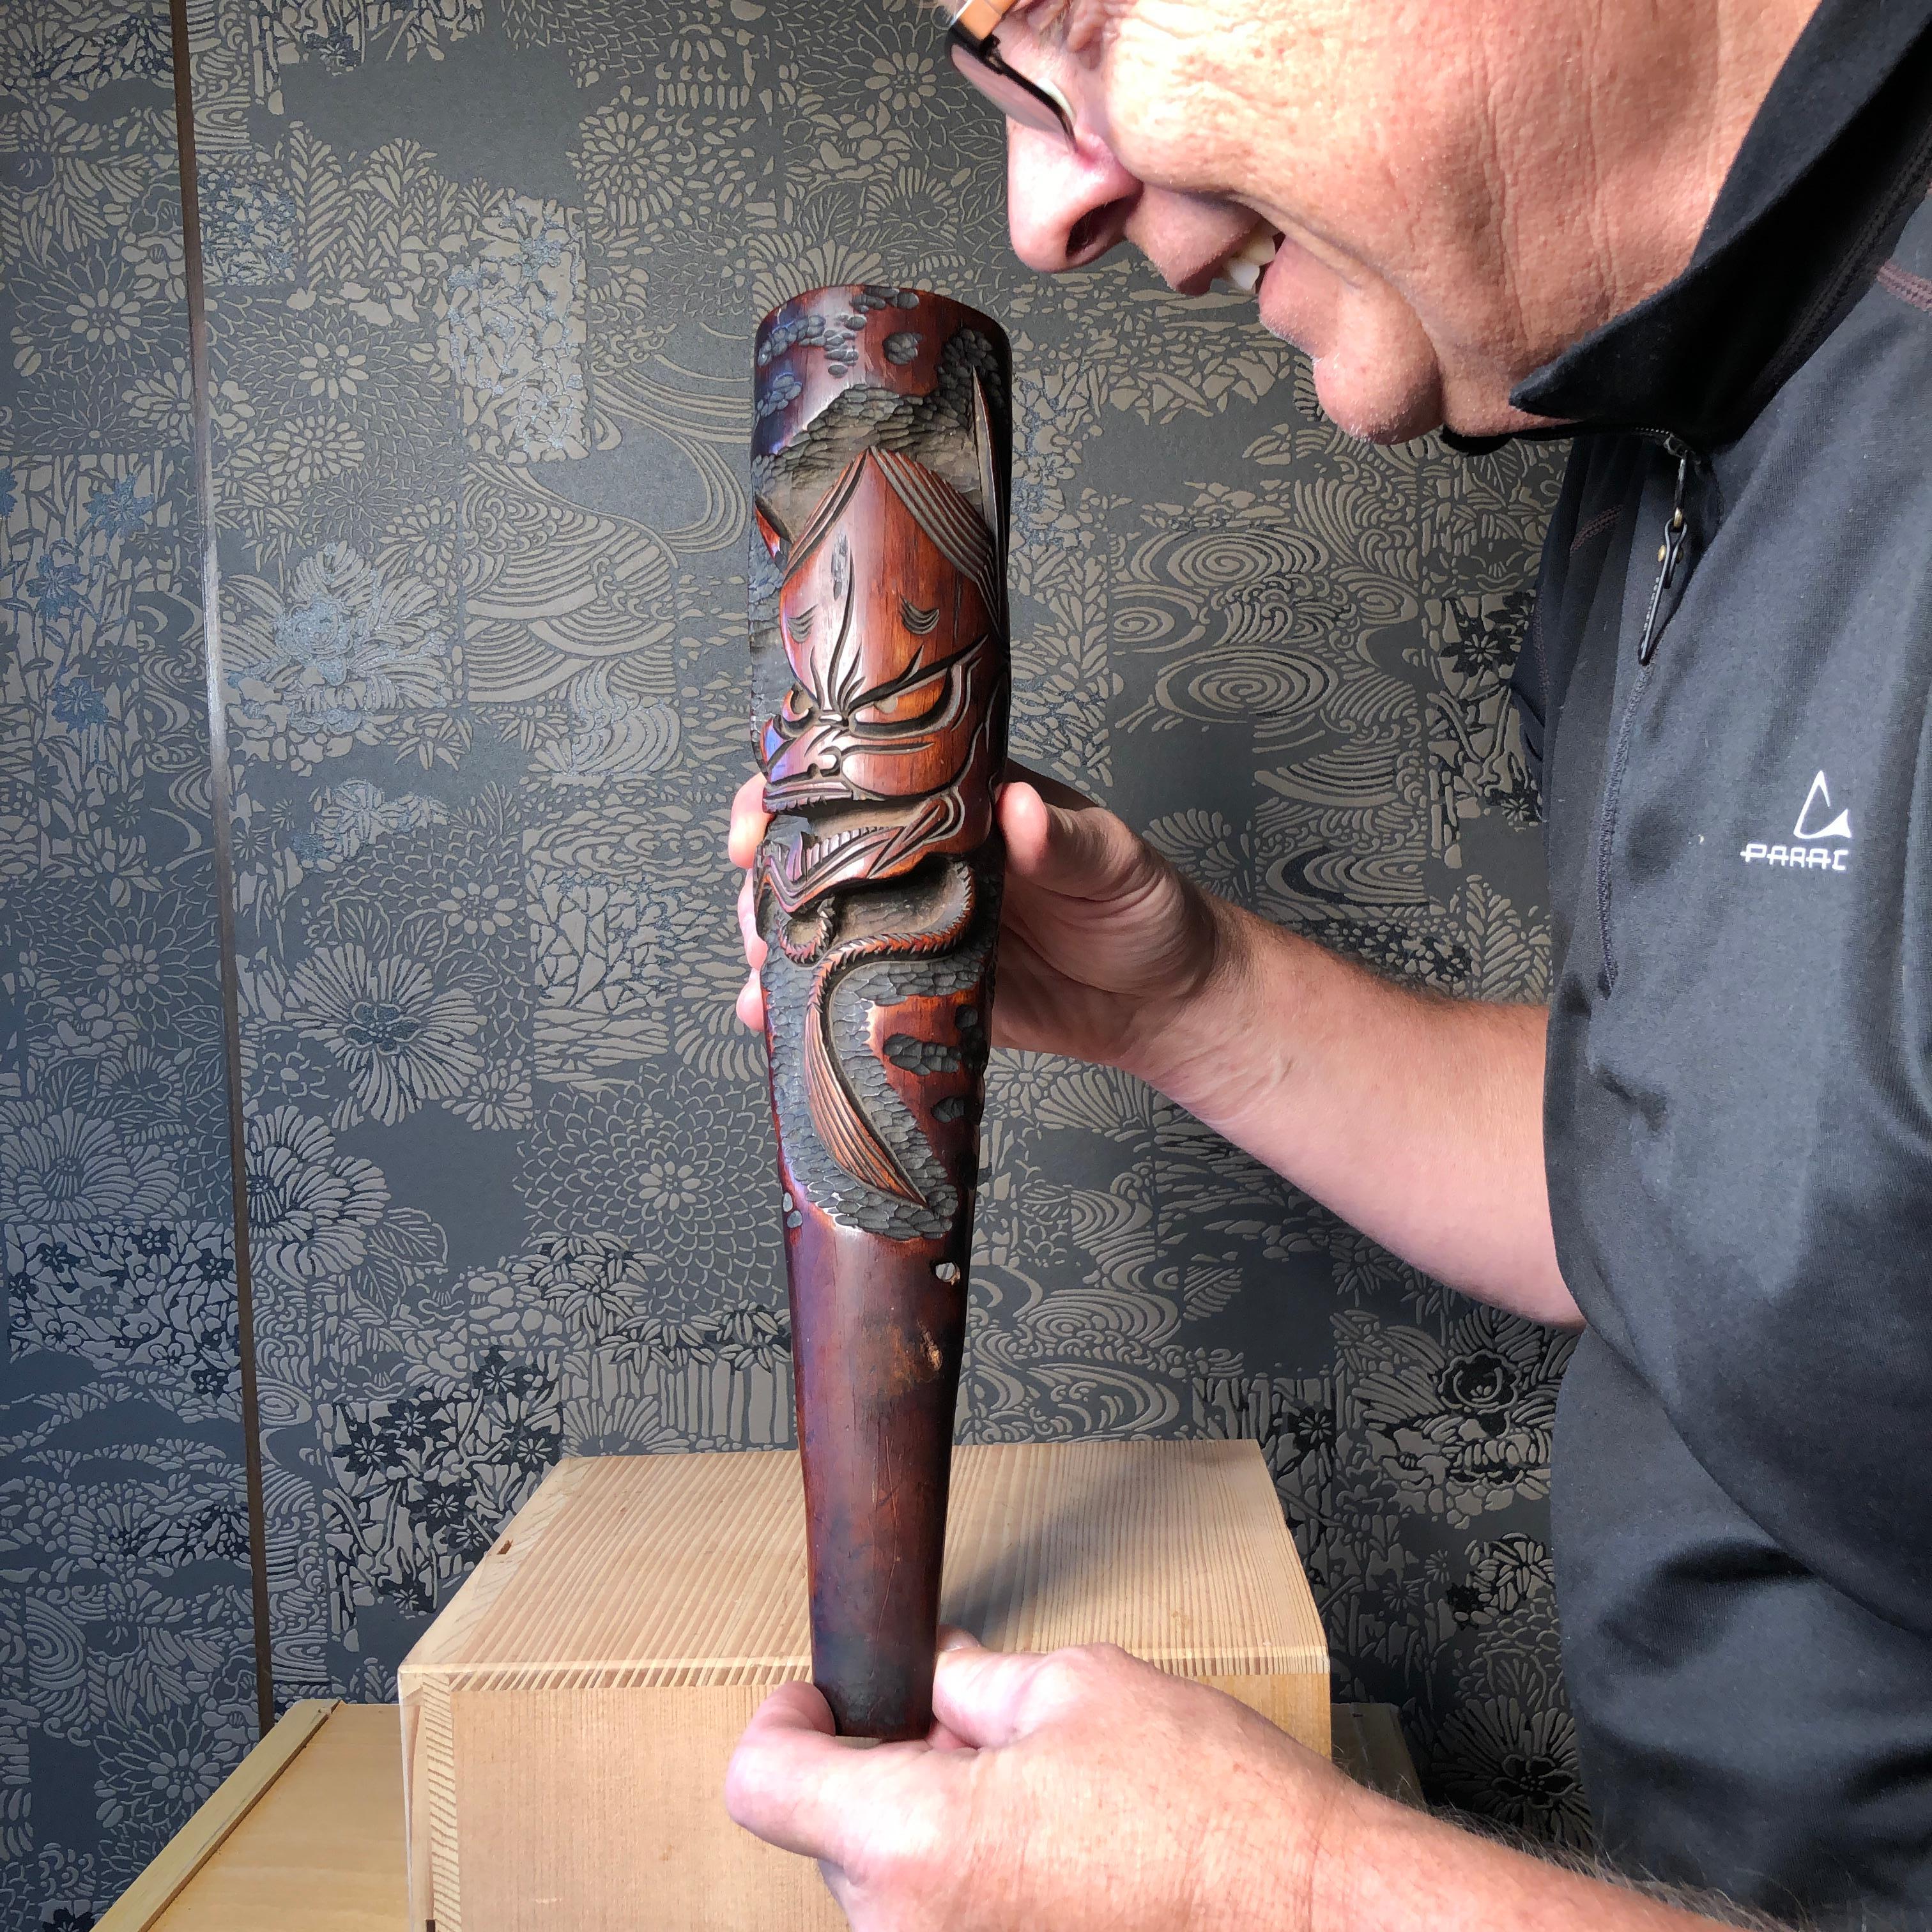 Rare find from our most recent Japanese acquisitions trip.

This is a unique Japanese large hand carved wood kiseru Yakusa opium or tobacco pipe dated October 12, 1895 and with the owner's name, Koike Sanfuro. 

The massive pipe It features a deeply